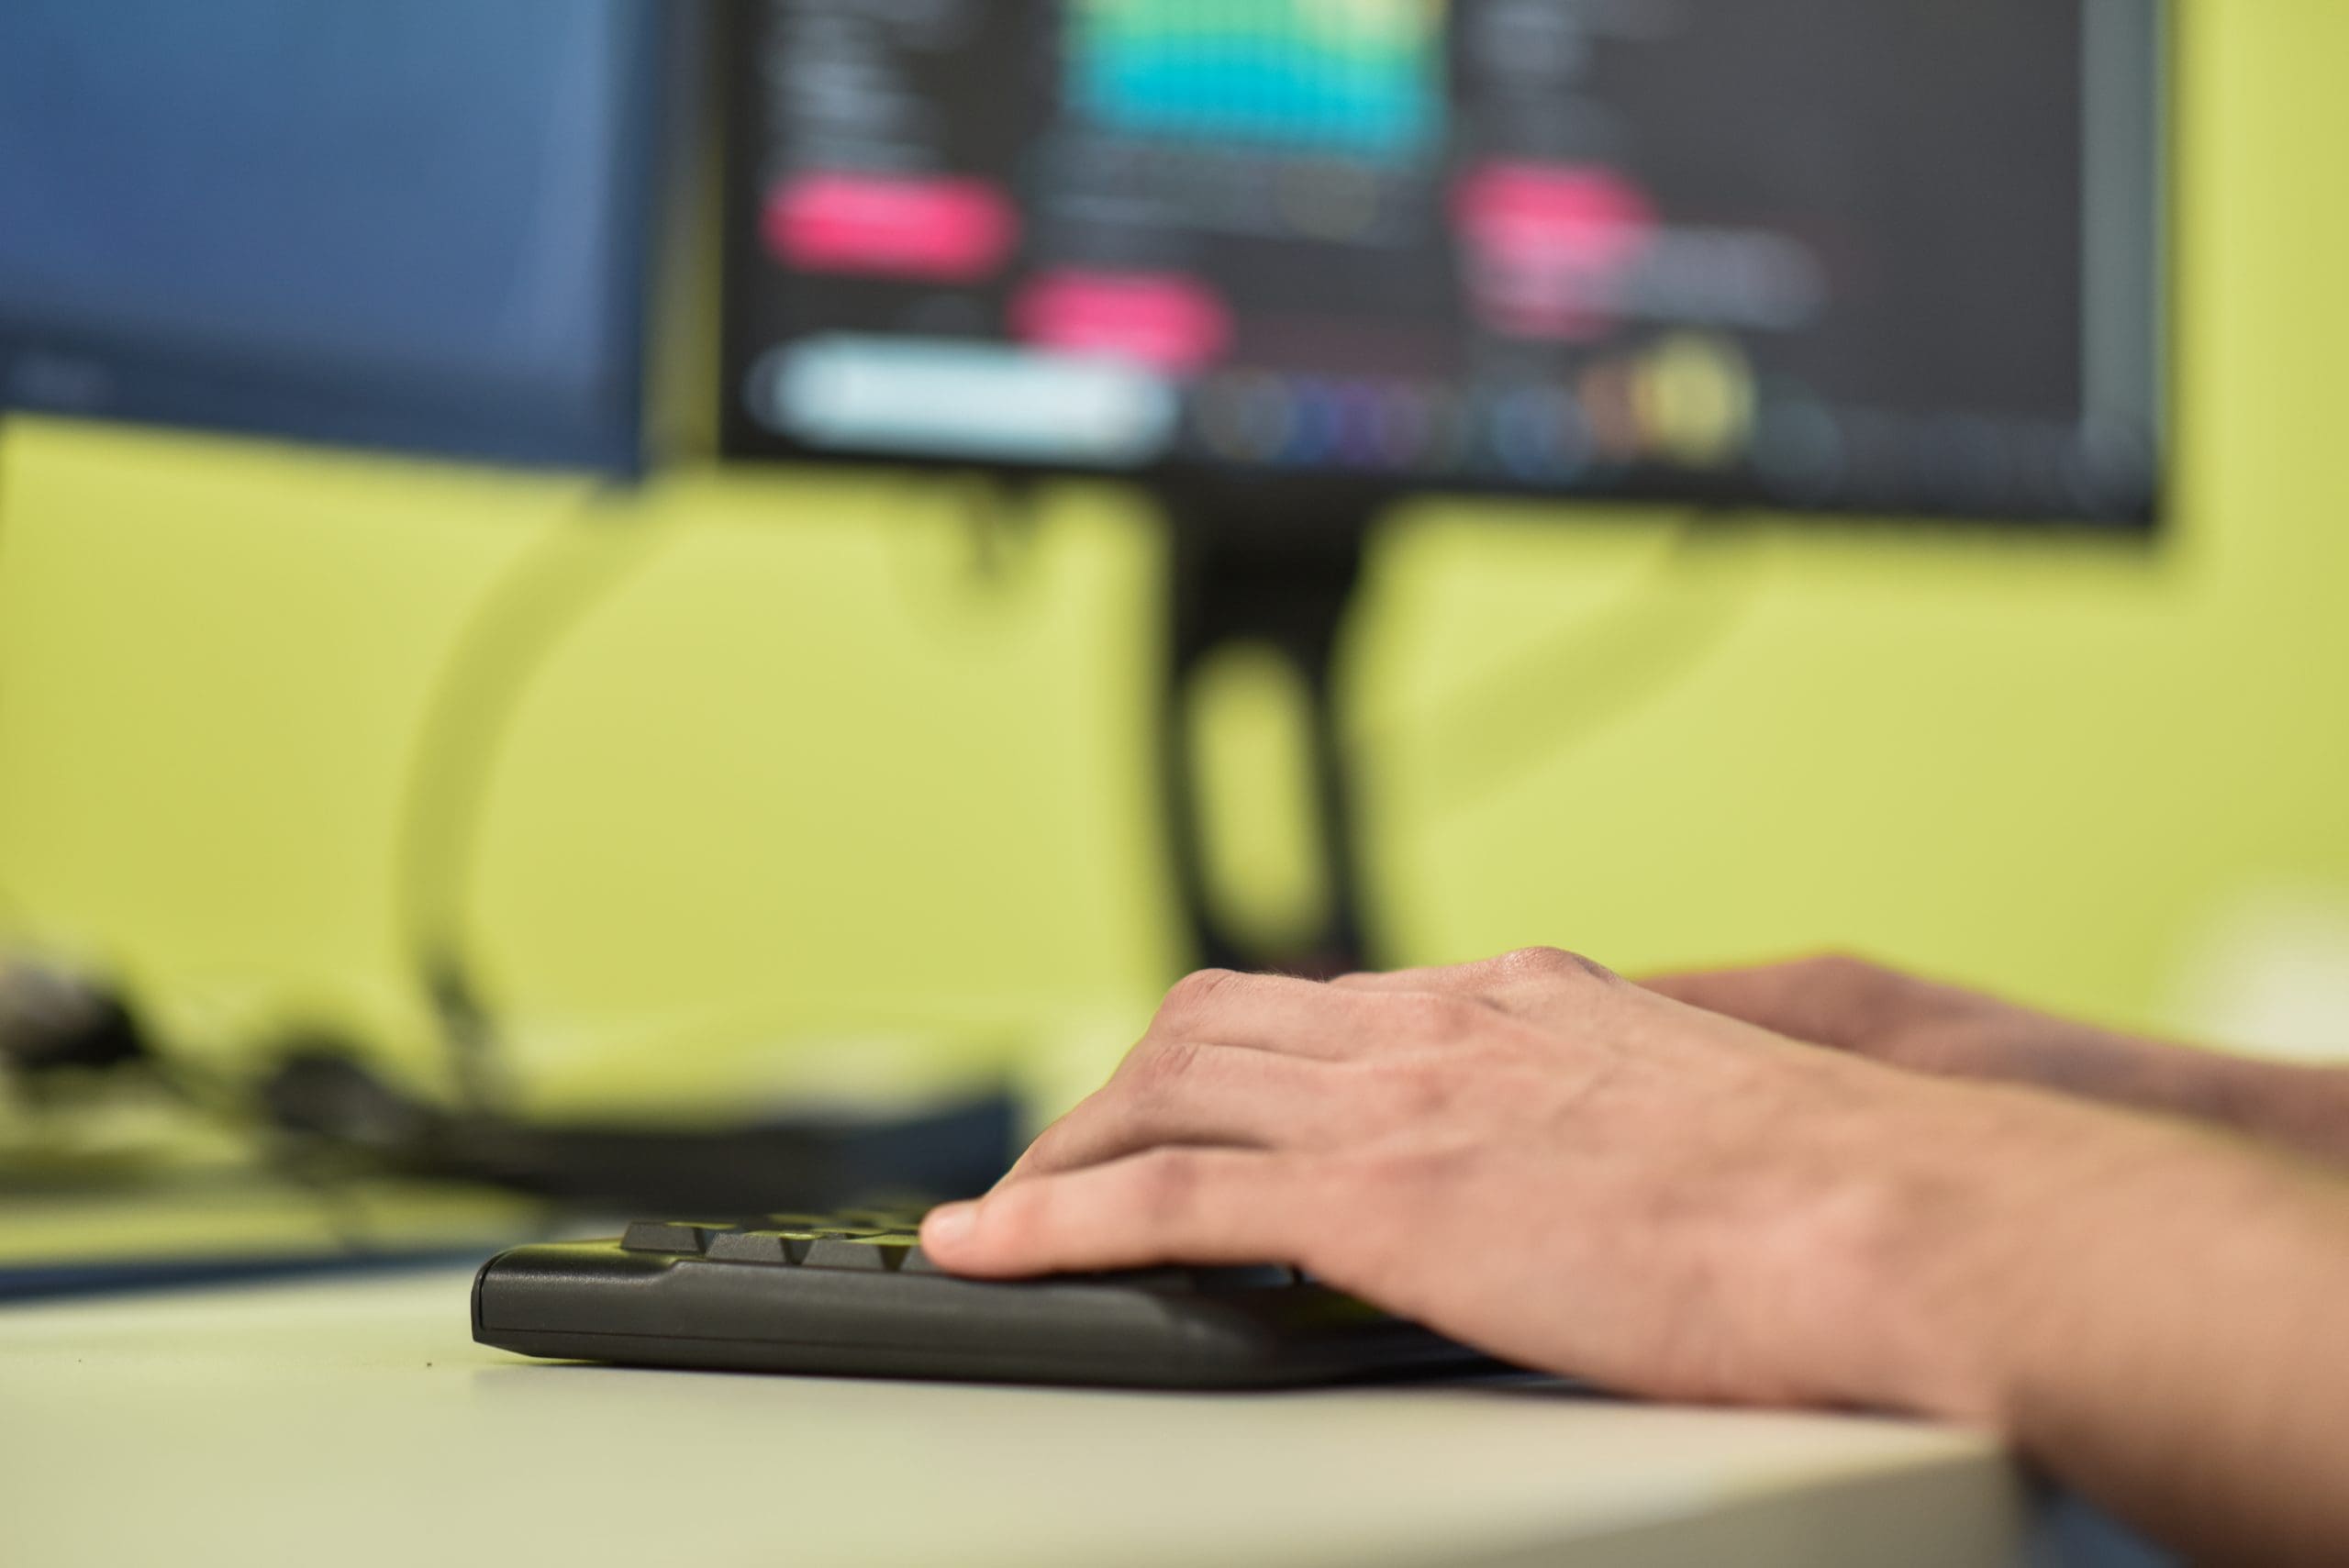 Photograph of two hands typing on keyboard, infront of two desktop monitors, one showing an analytics dashboard.